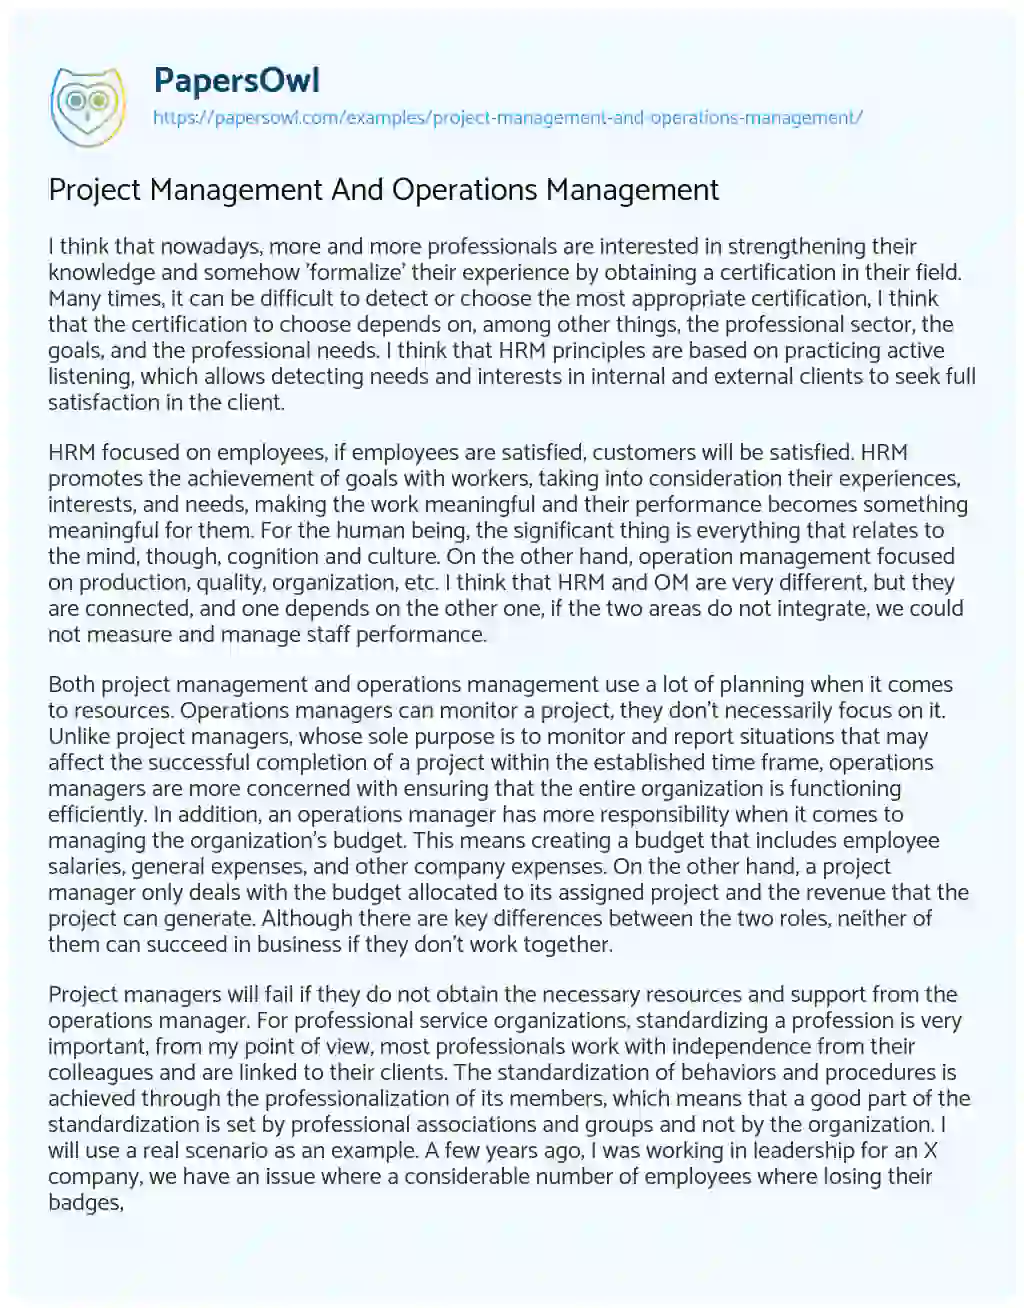 Project Management and Operations Management essay